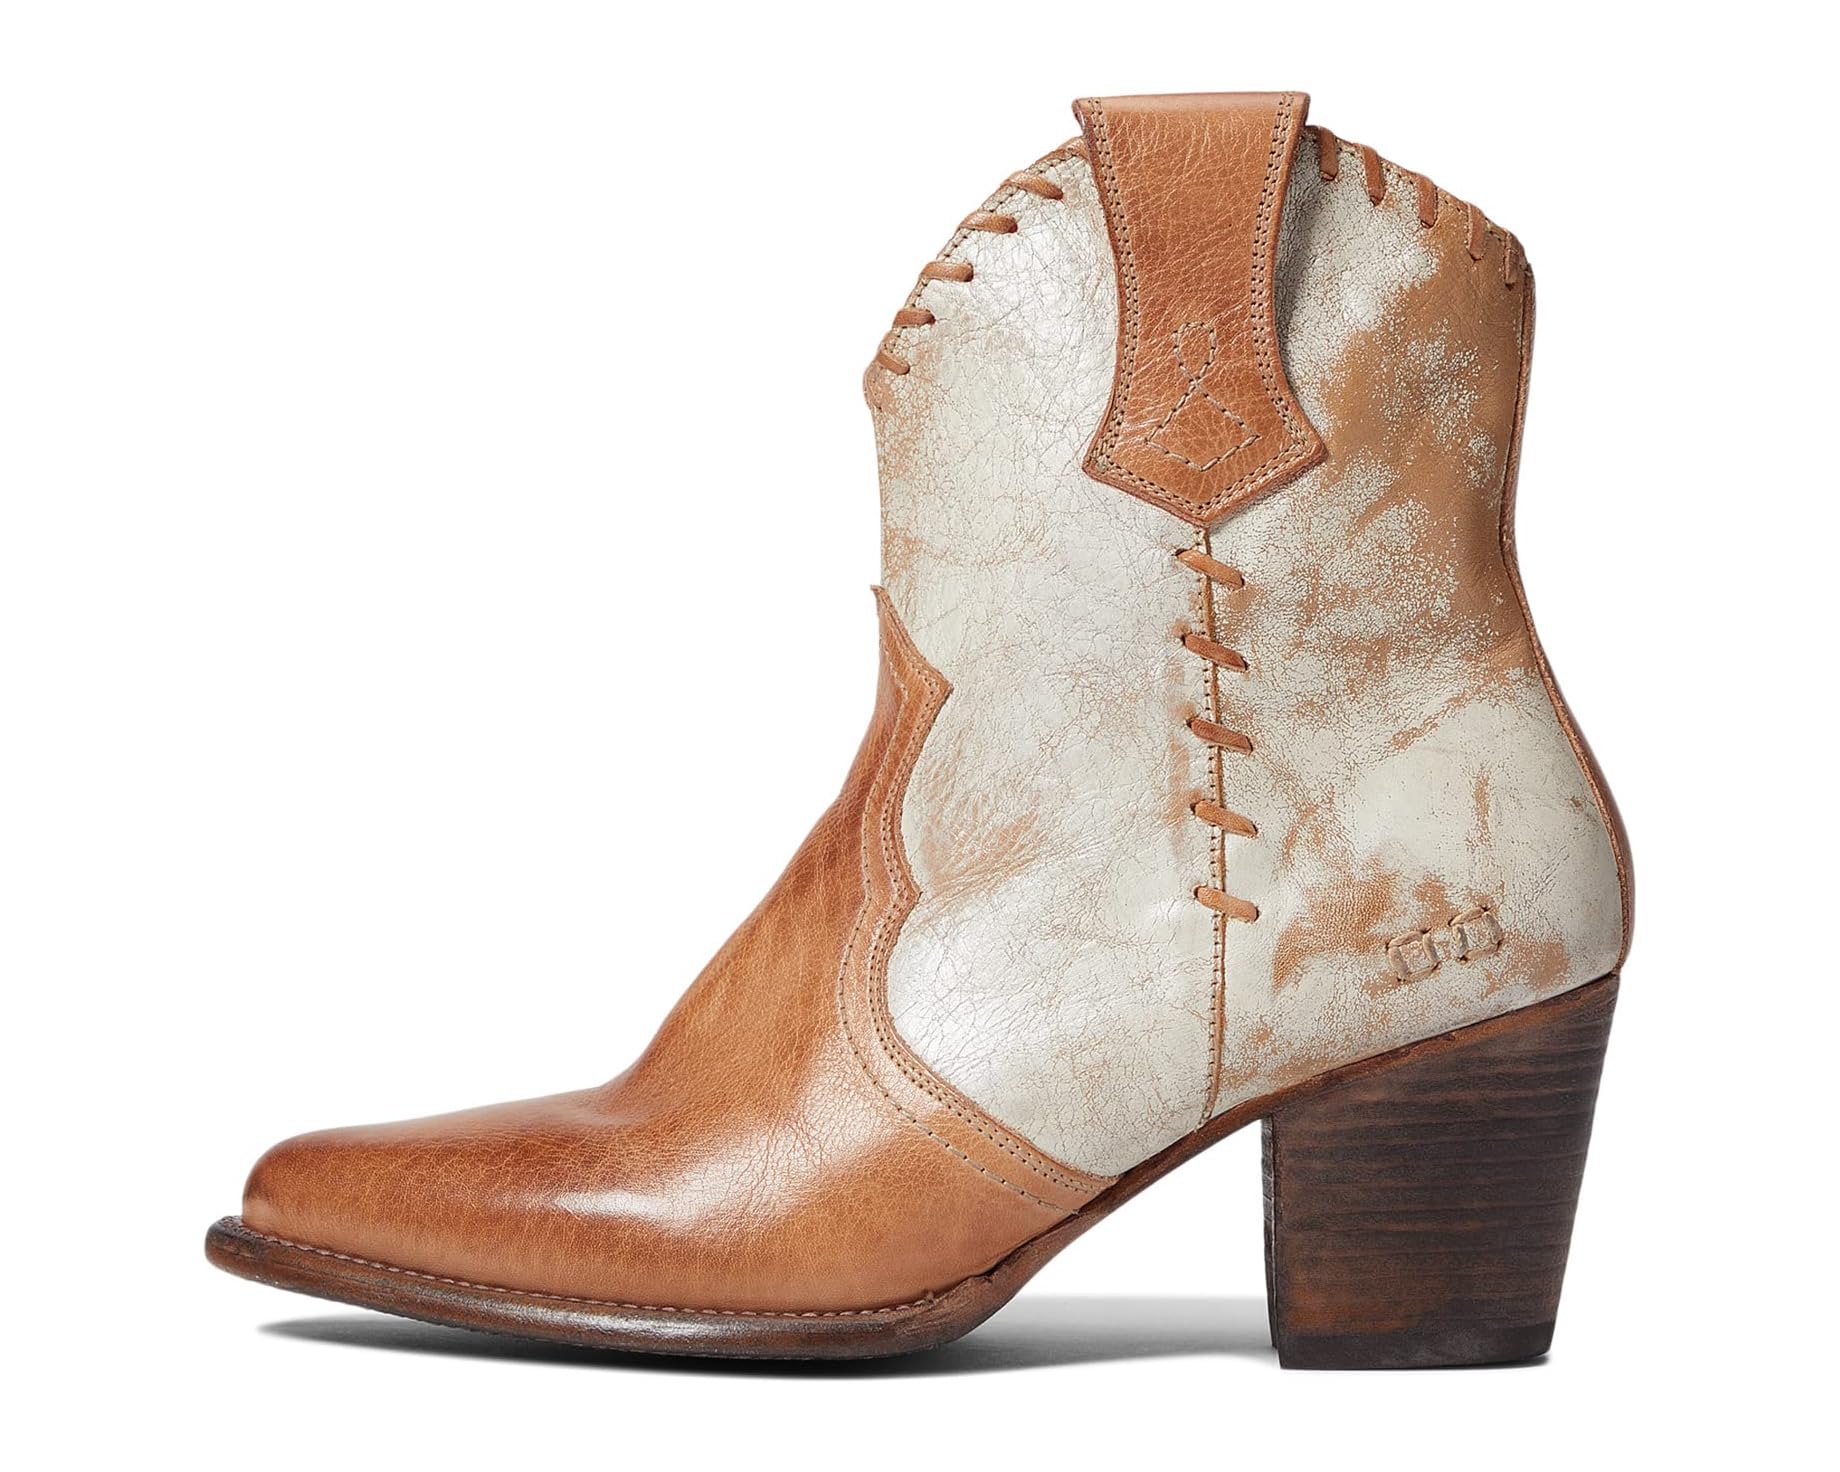 How to Wear Western Ankle Boots